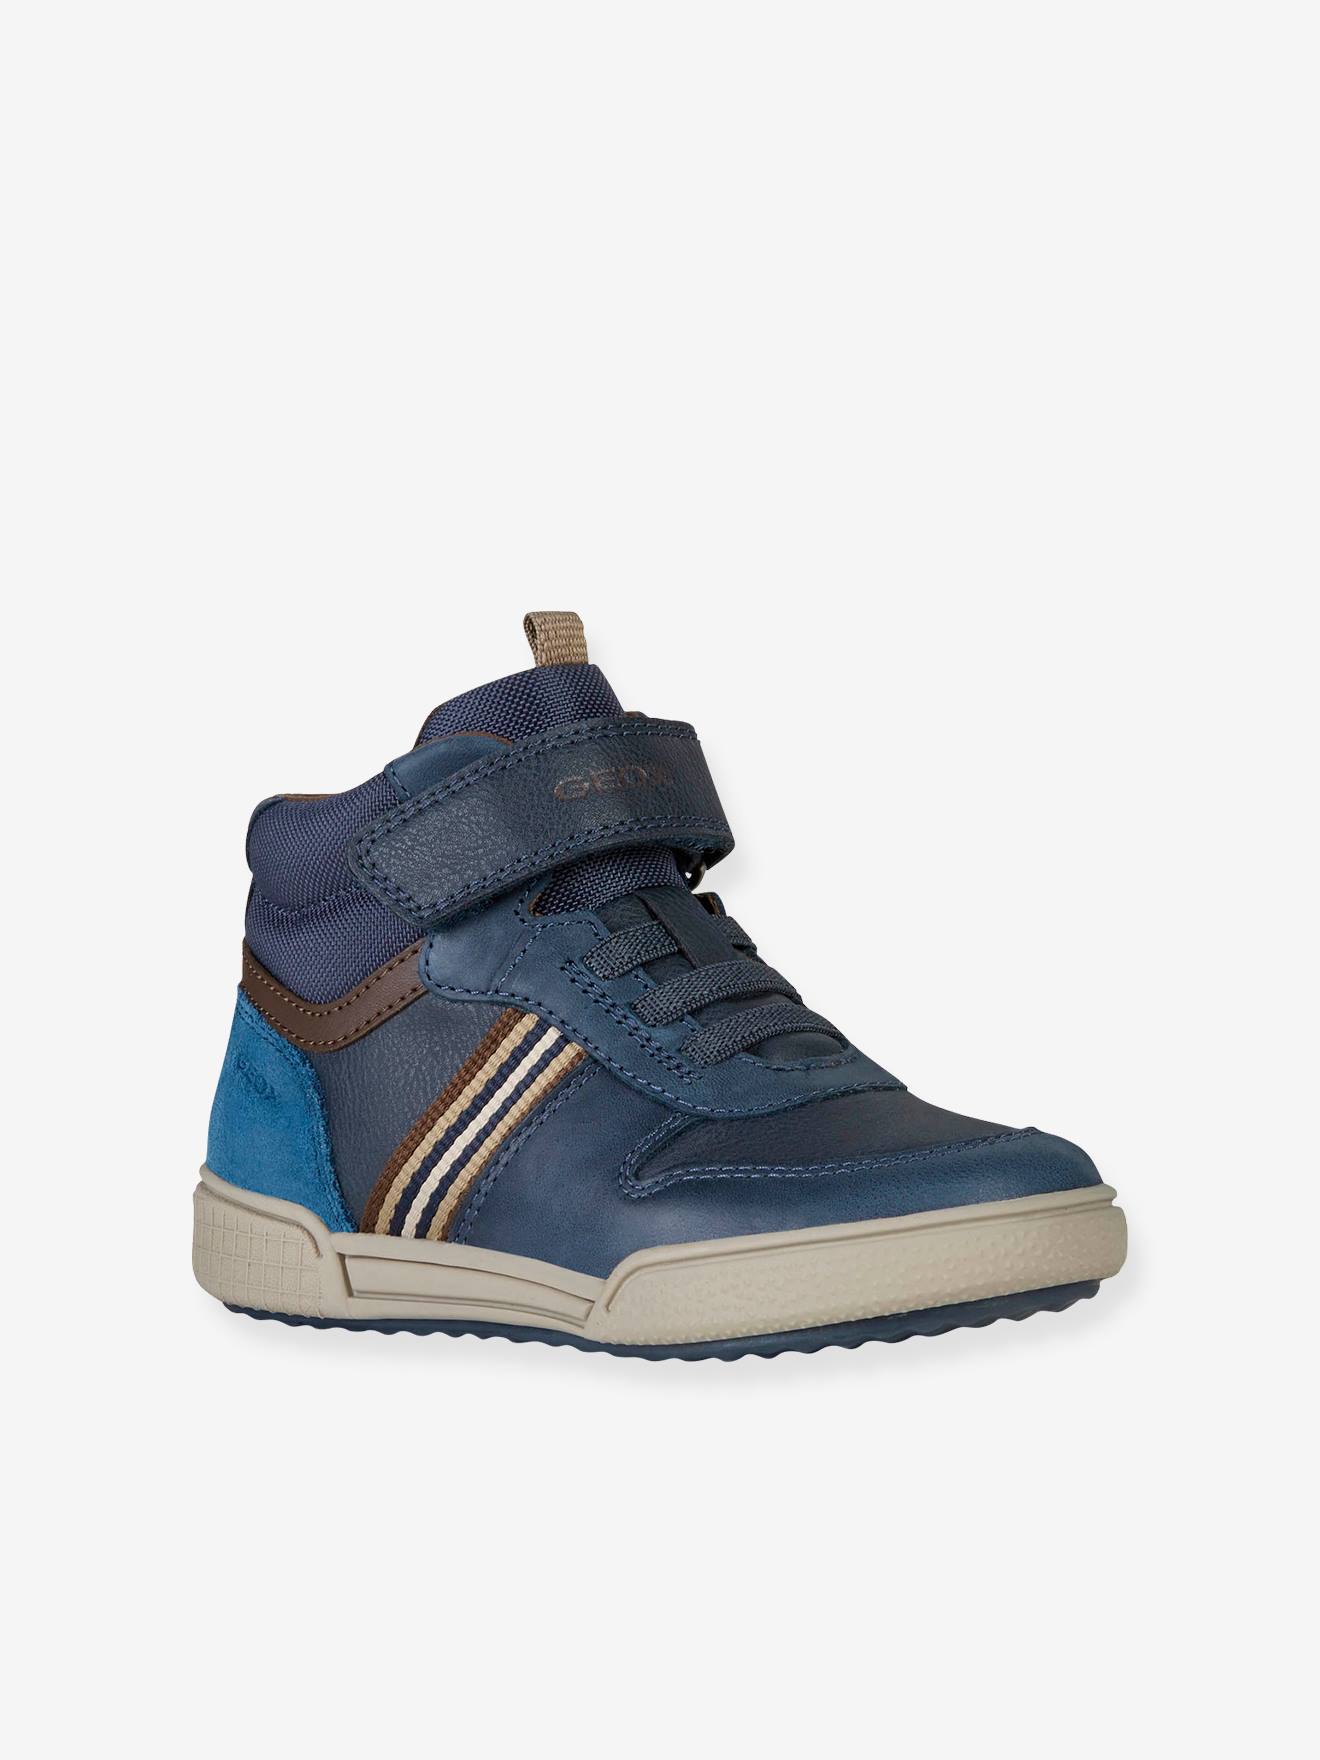 geox high top trainers